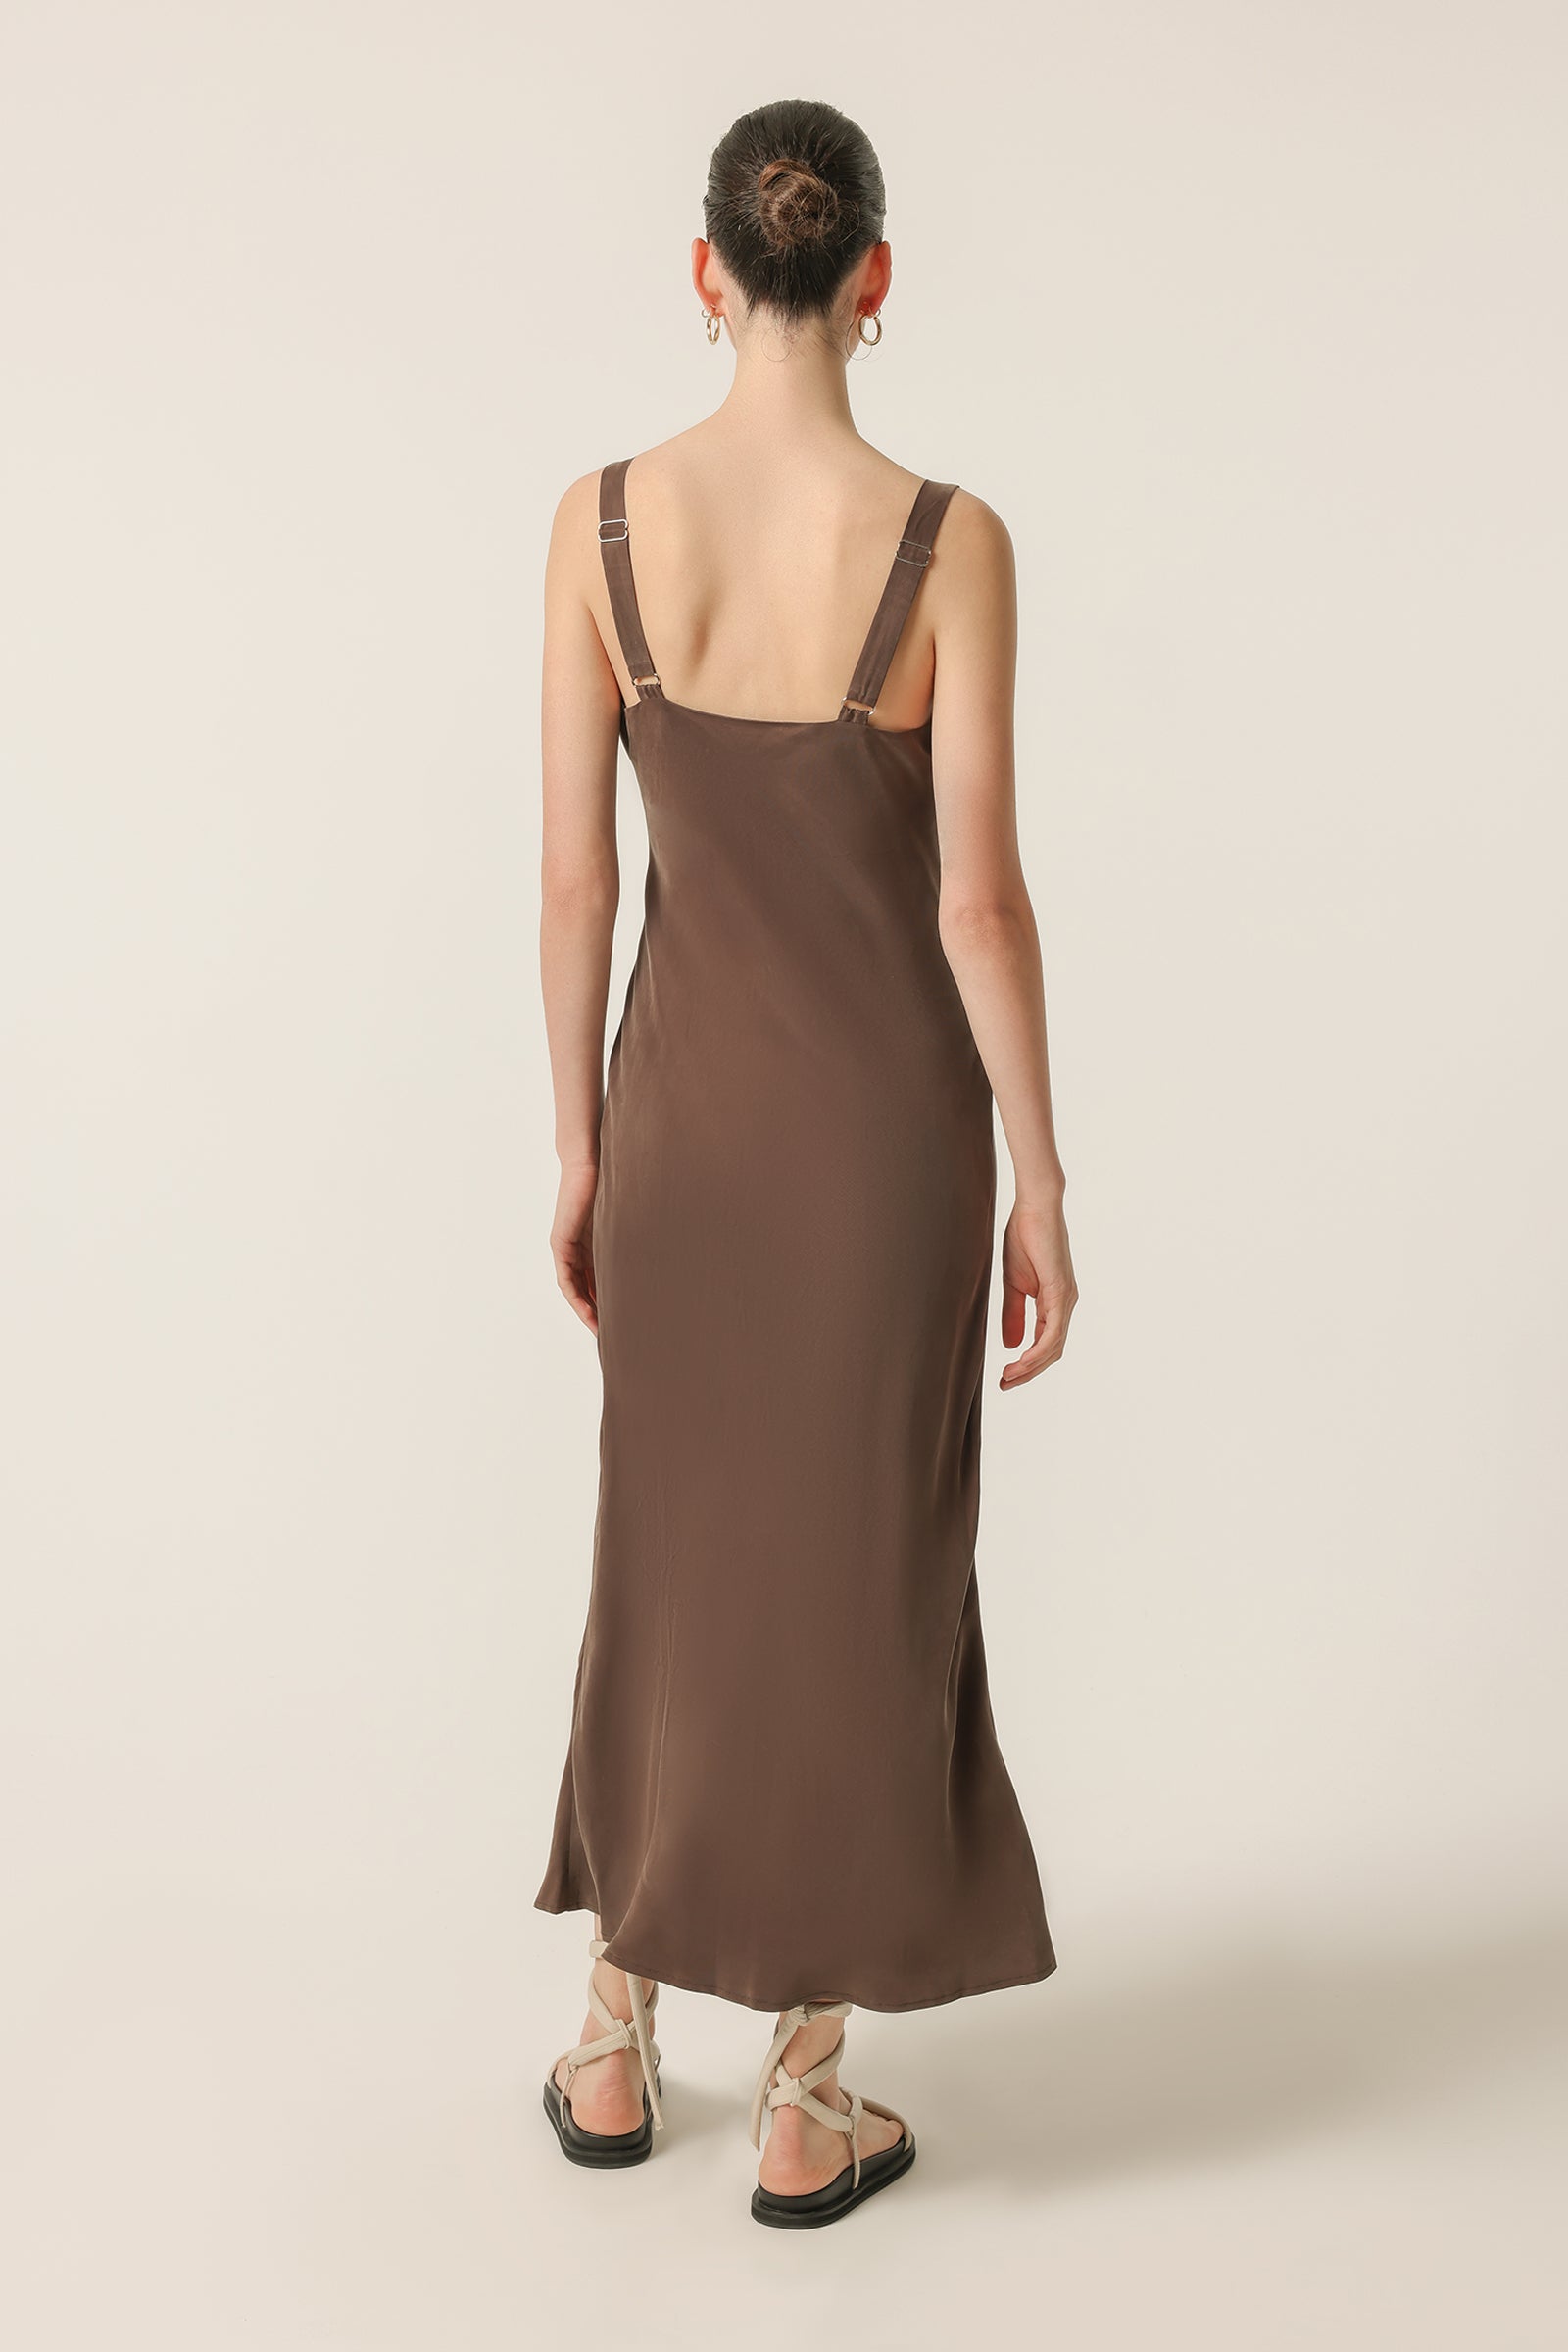 Nude Lucy Harlow Cupro Slip Dress In a Deep Brown Bark Colour 